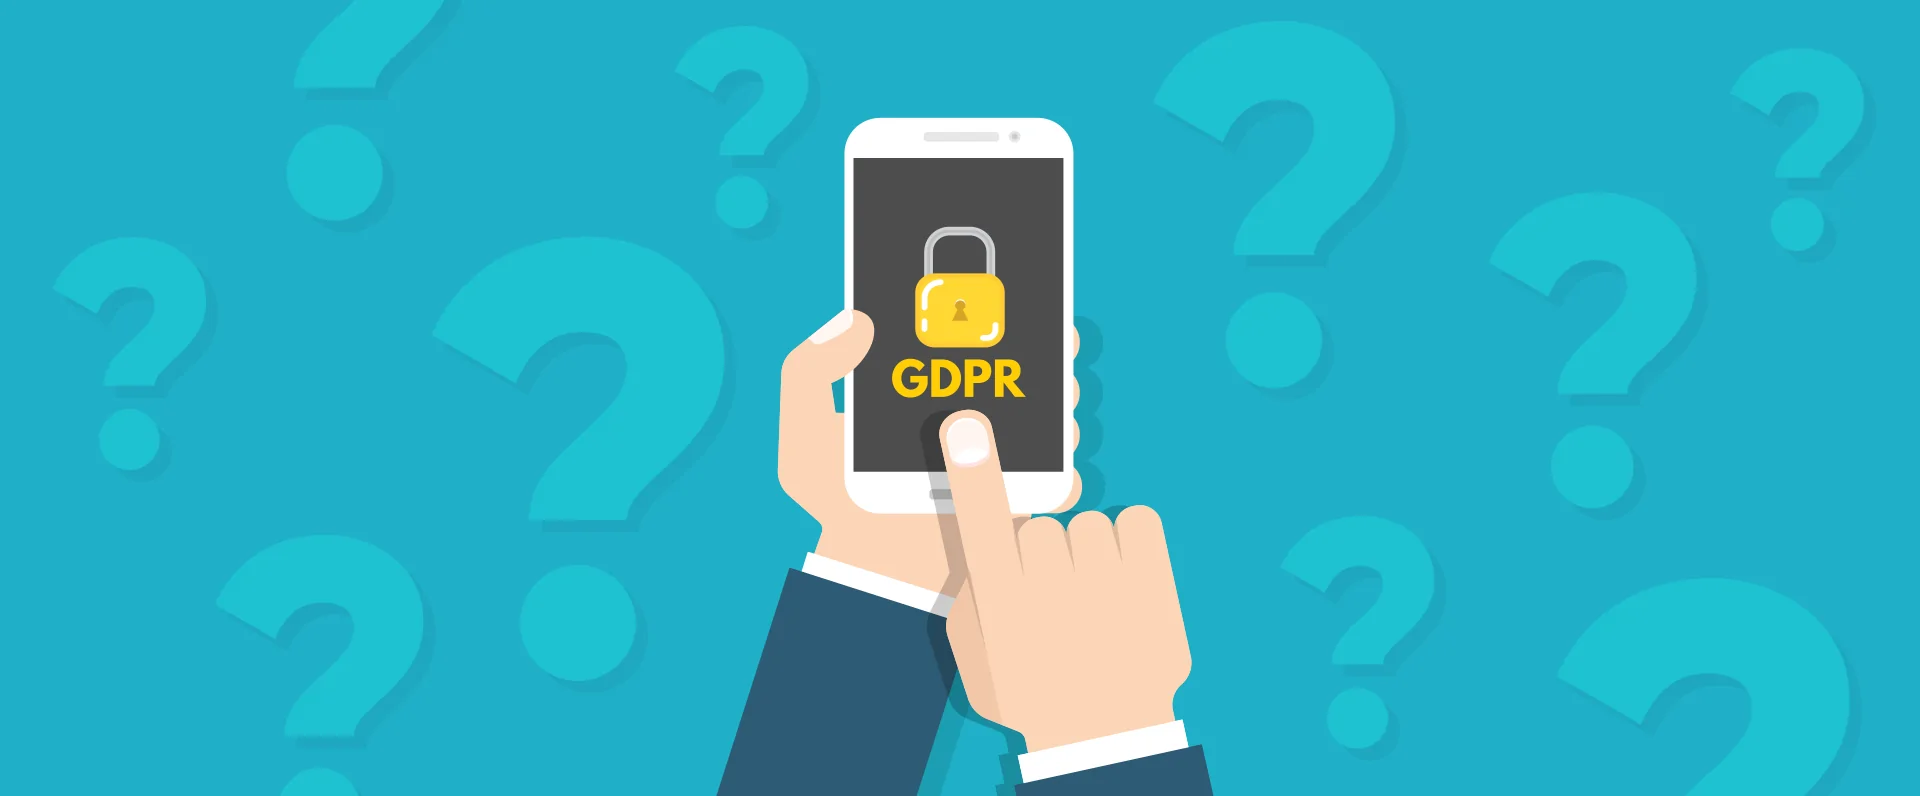 Online Branded Games and GDPR Explained